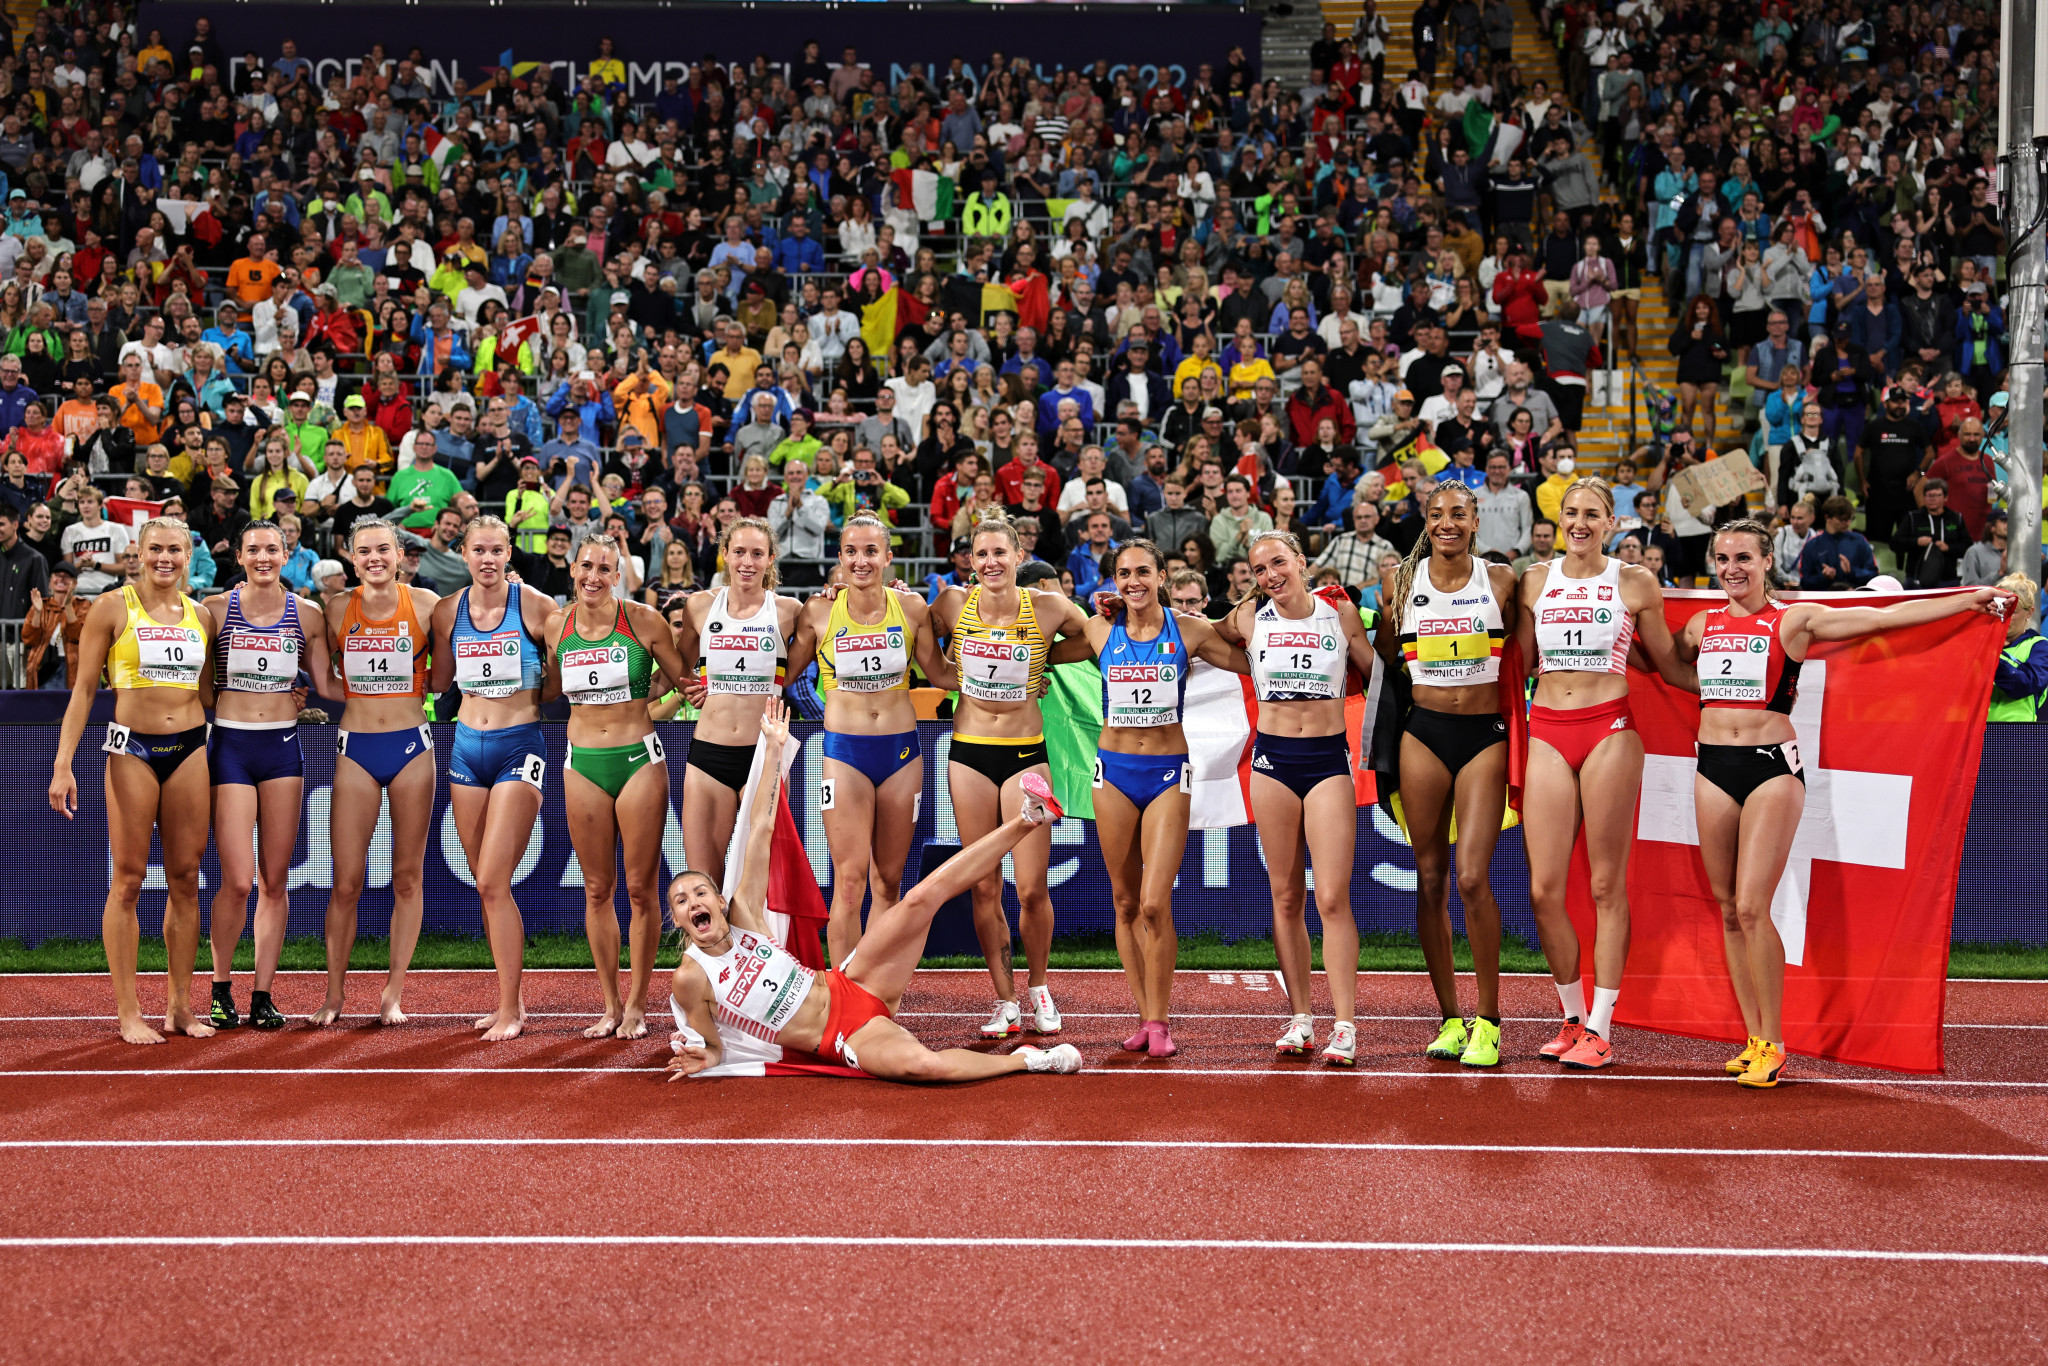 Participants in the women's heptathlon pose for a photo following two gruelling days of competition ©Getty Images